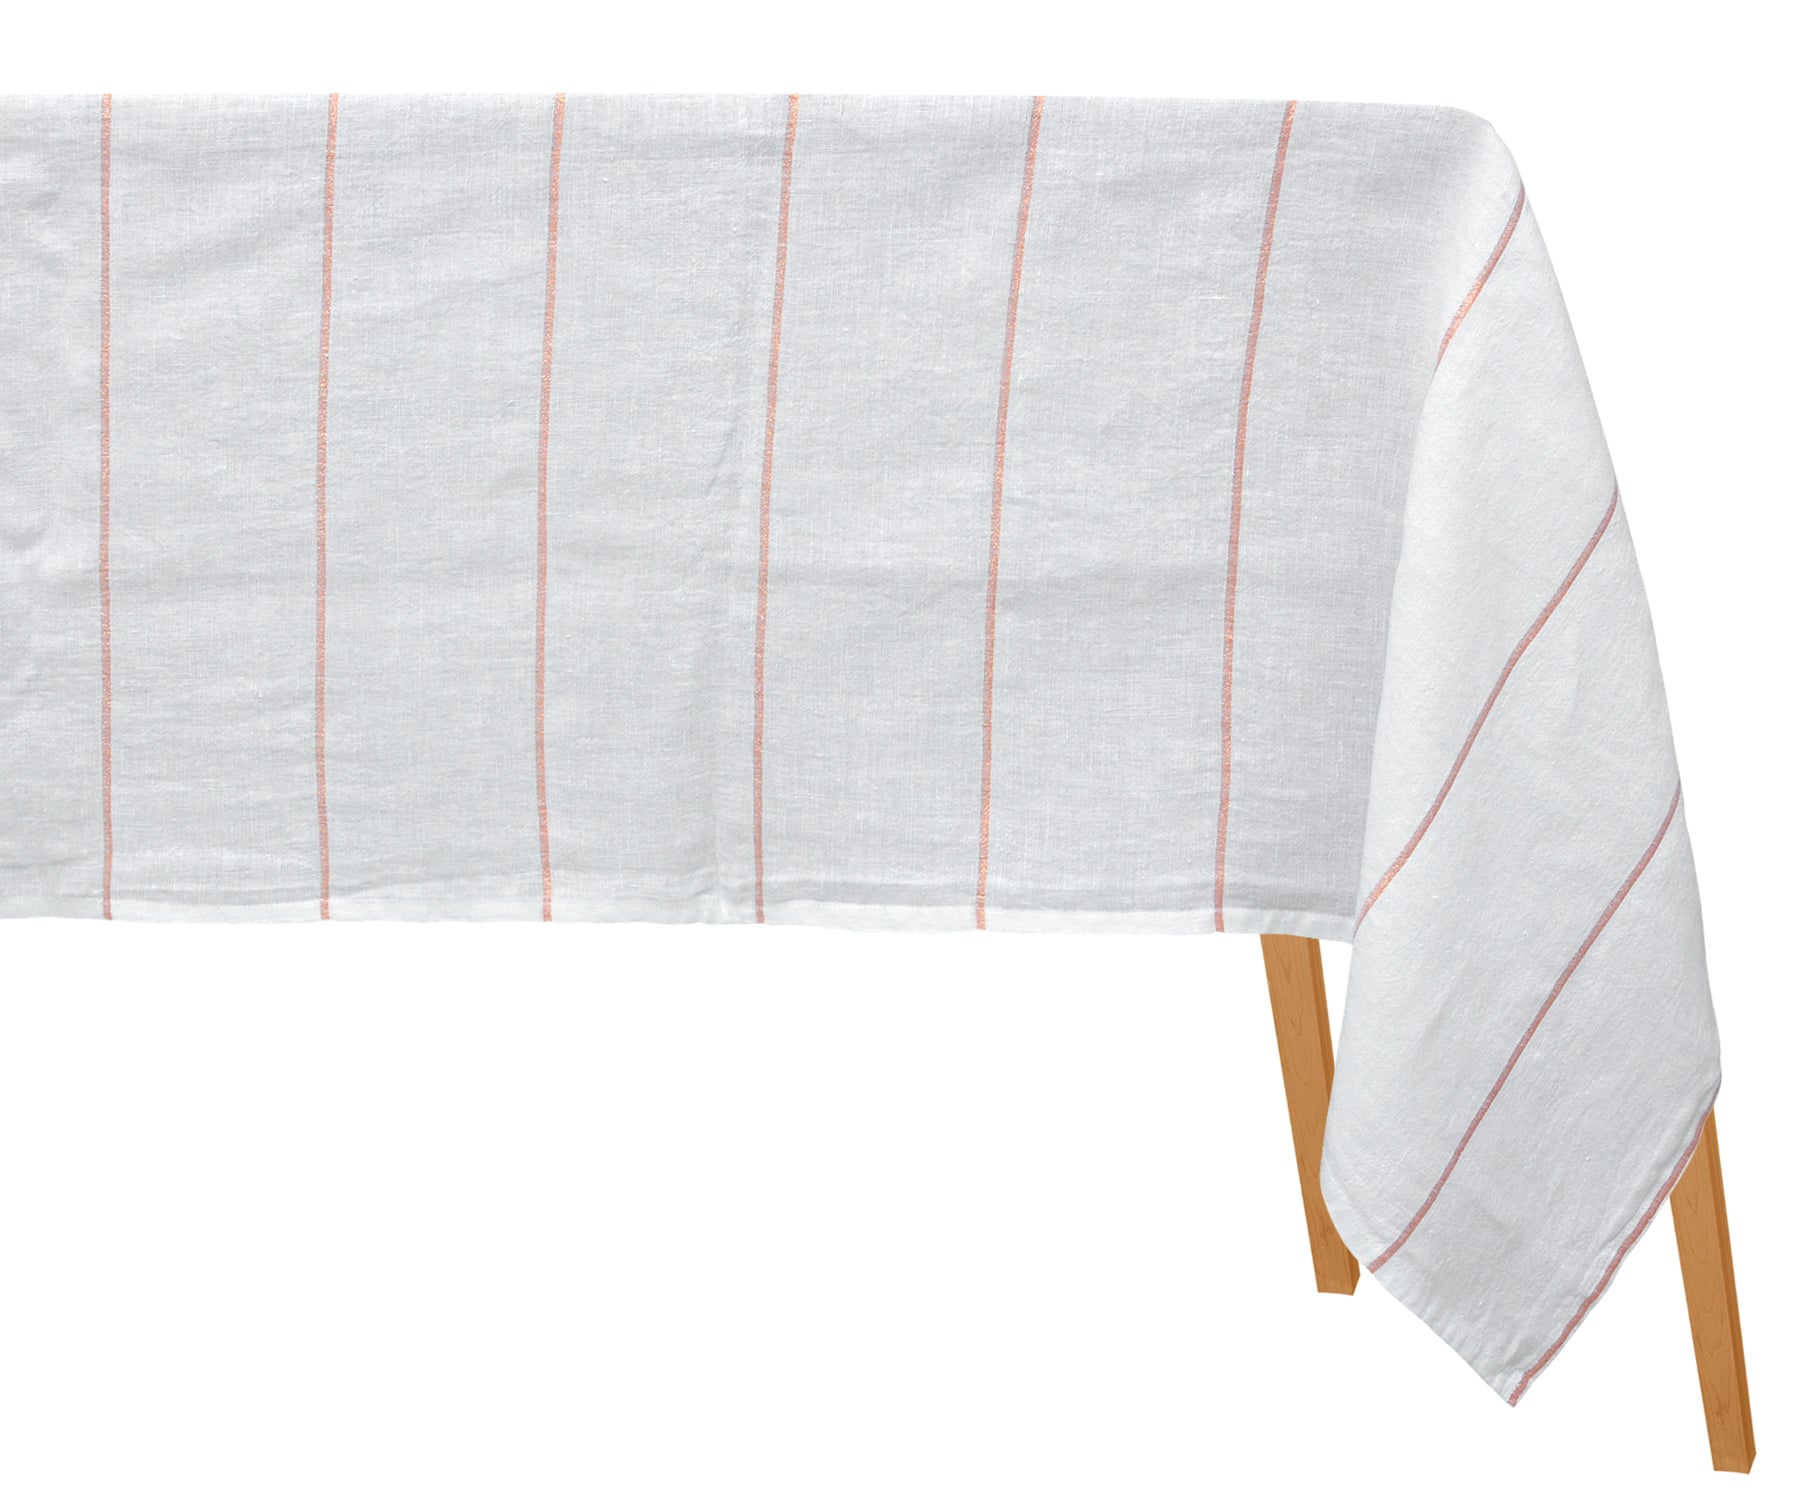 Linen Tablecloths available in various sizes to fit your table perfectly.